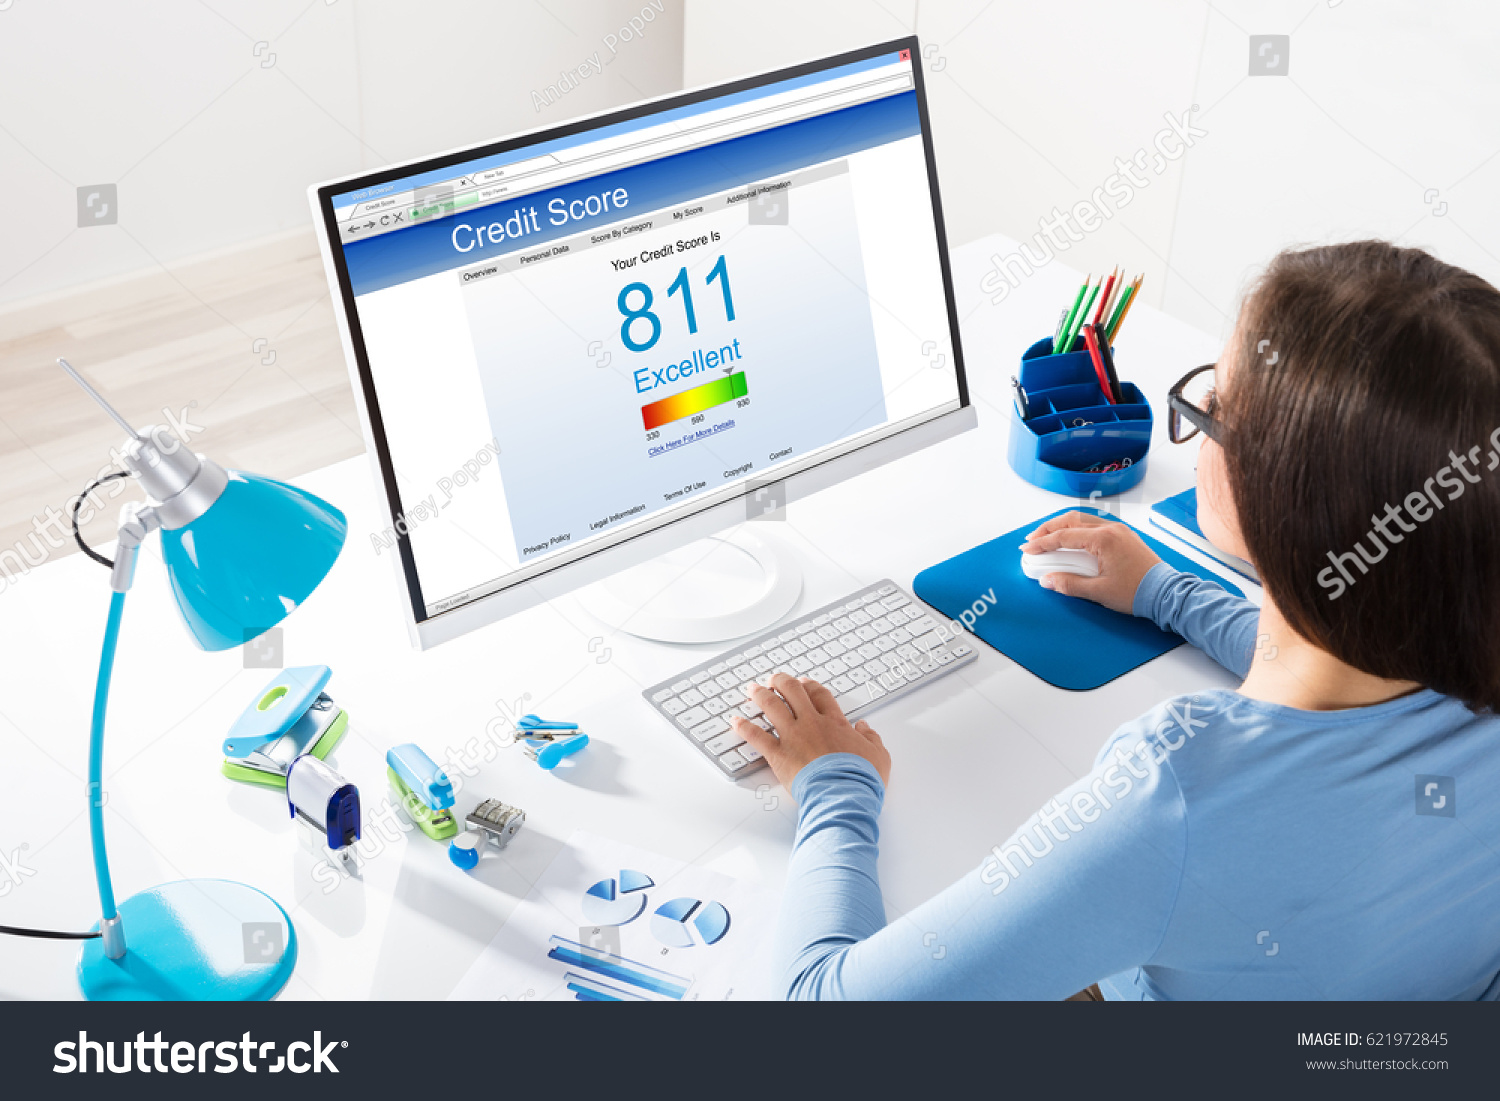 Close-up Of A Businesswoman Checking Credit Score On Computer At Workplace #621972845